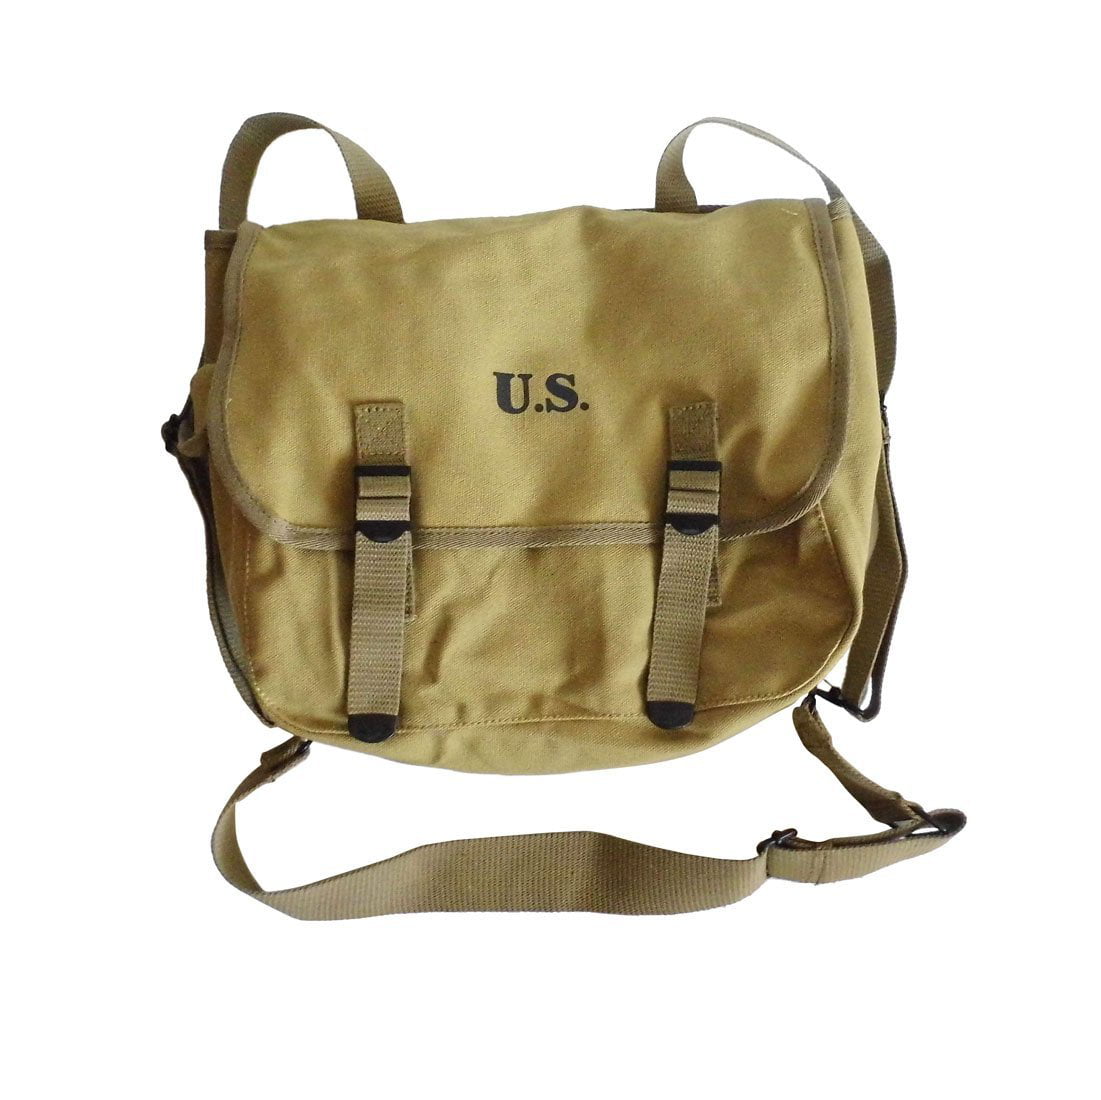 WWII WW2 US M36 Haversack Musette Field Bag Military Back Pack Canvas Khaki NEW - 0 ...